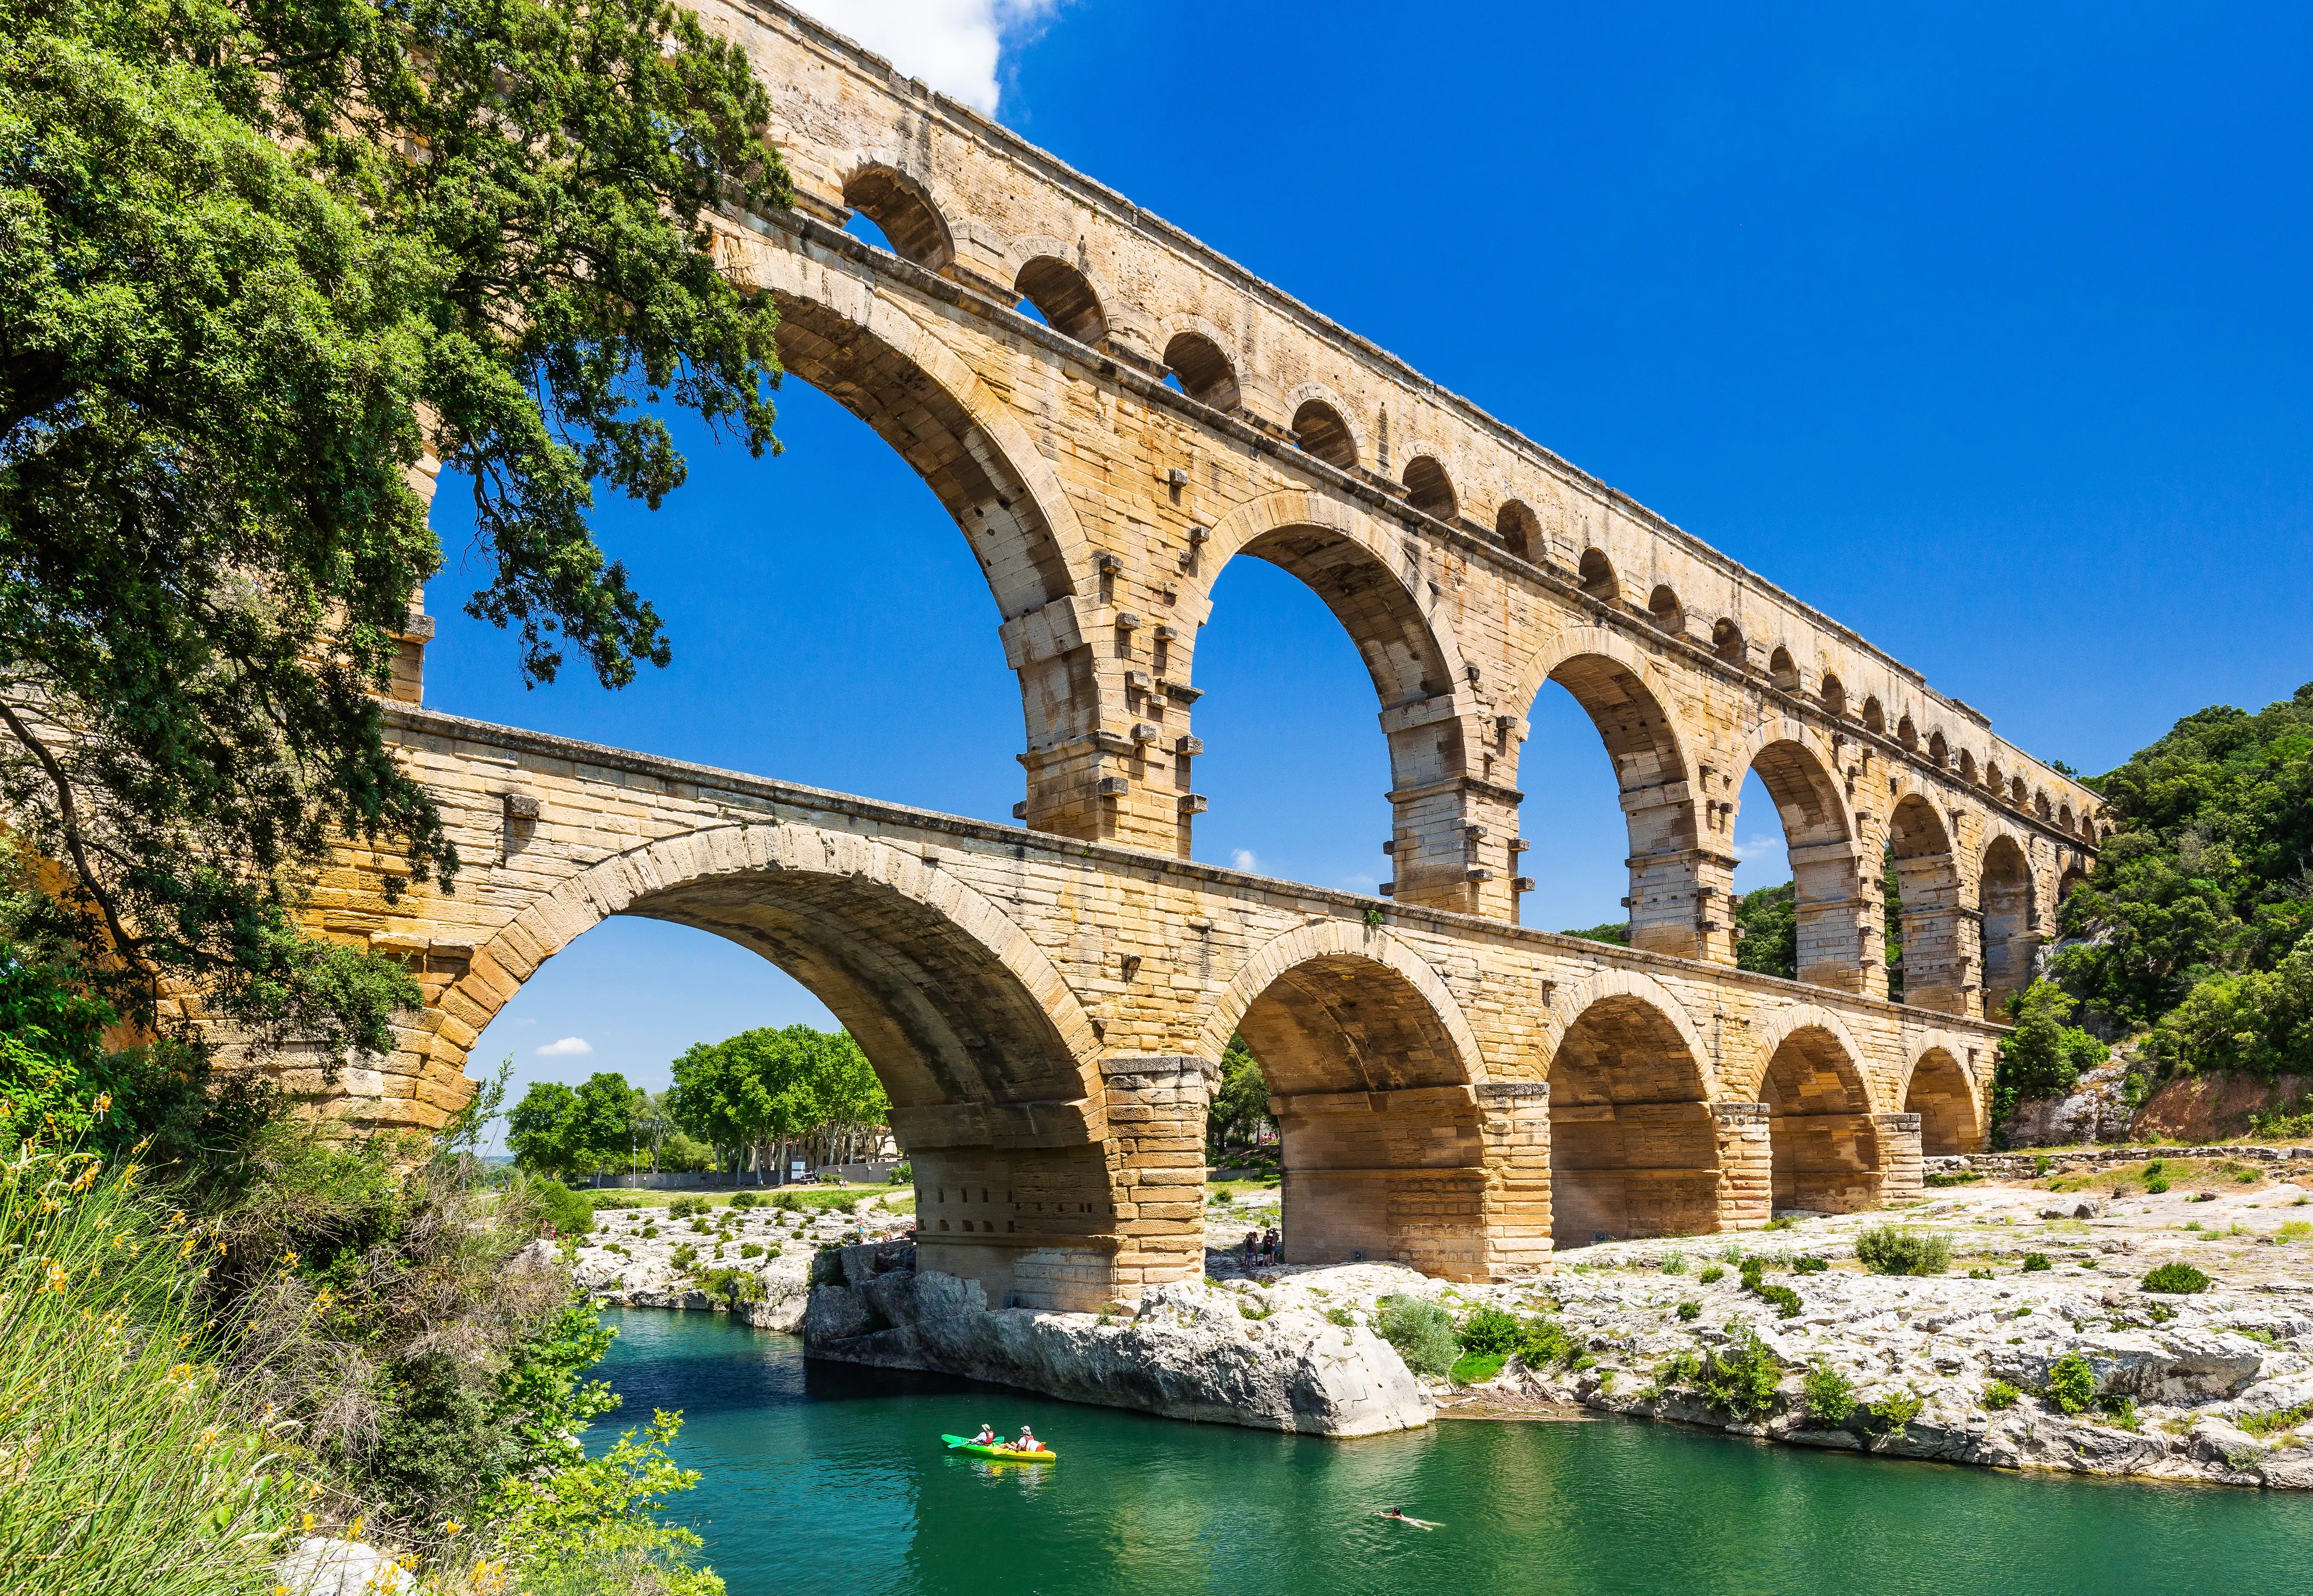 3-Day Romantic and Culinary Adventure in Nimes, France